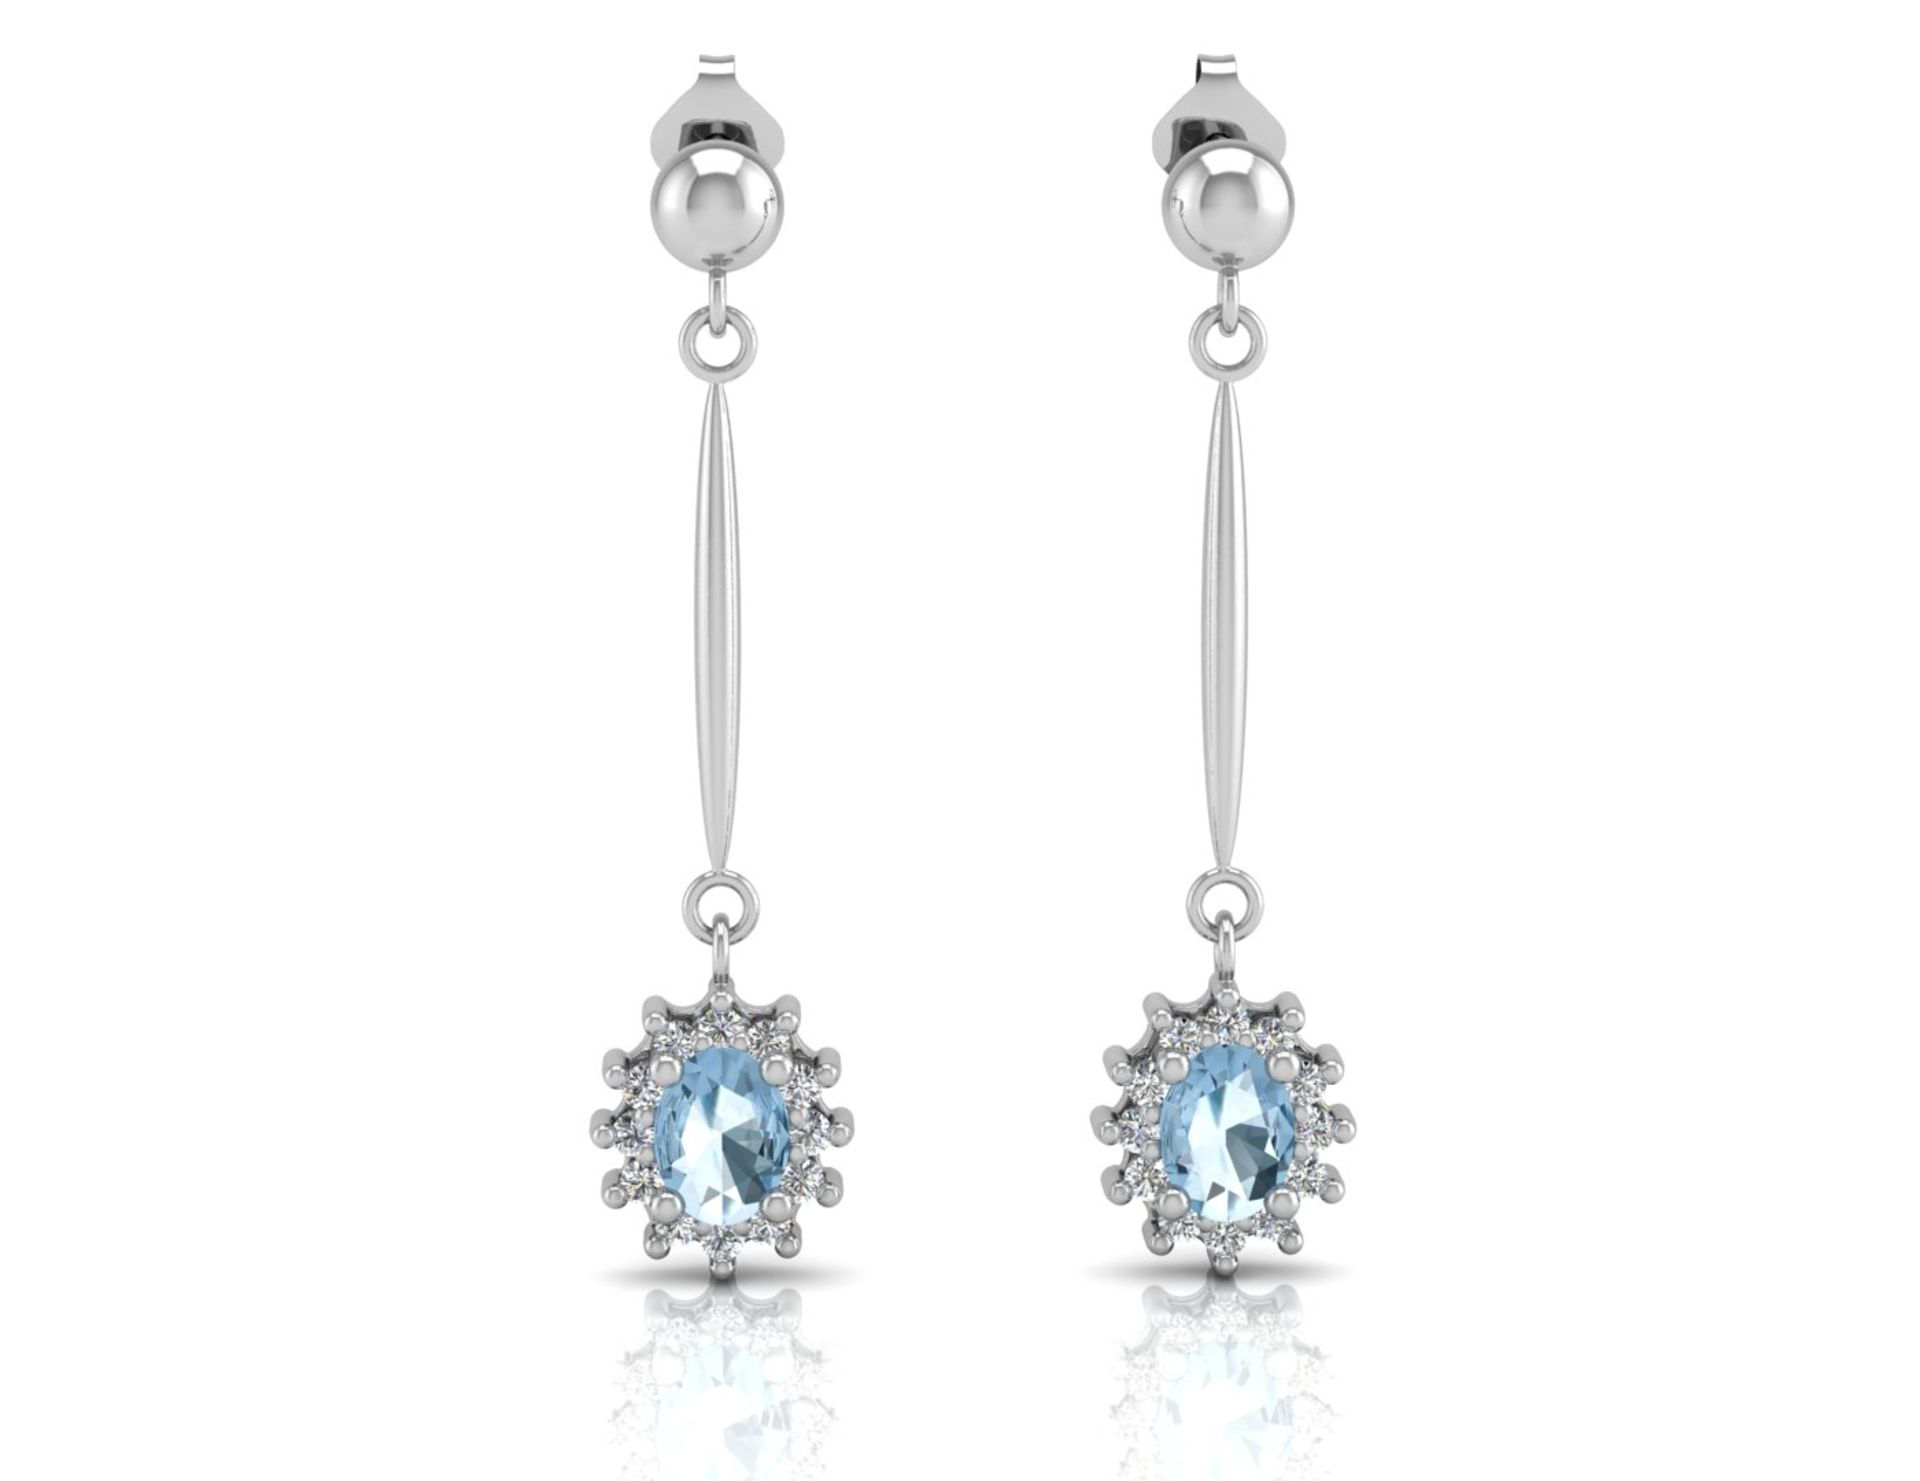 9ct White Gold Diamond And Blue Topaz Earring 0.12 - Image 3 of 4